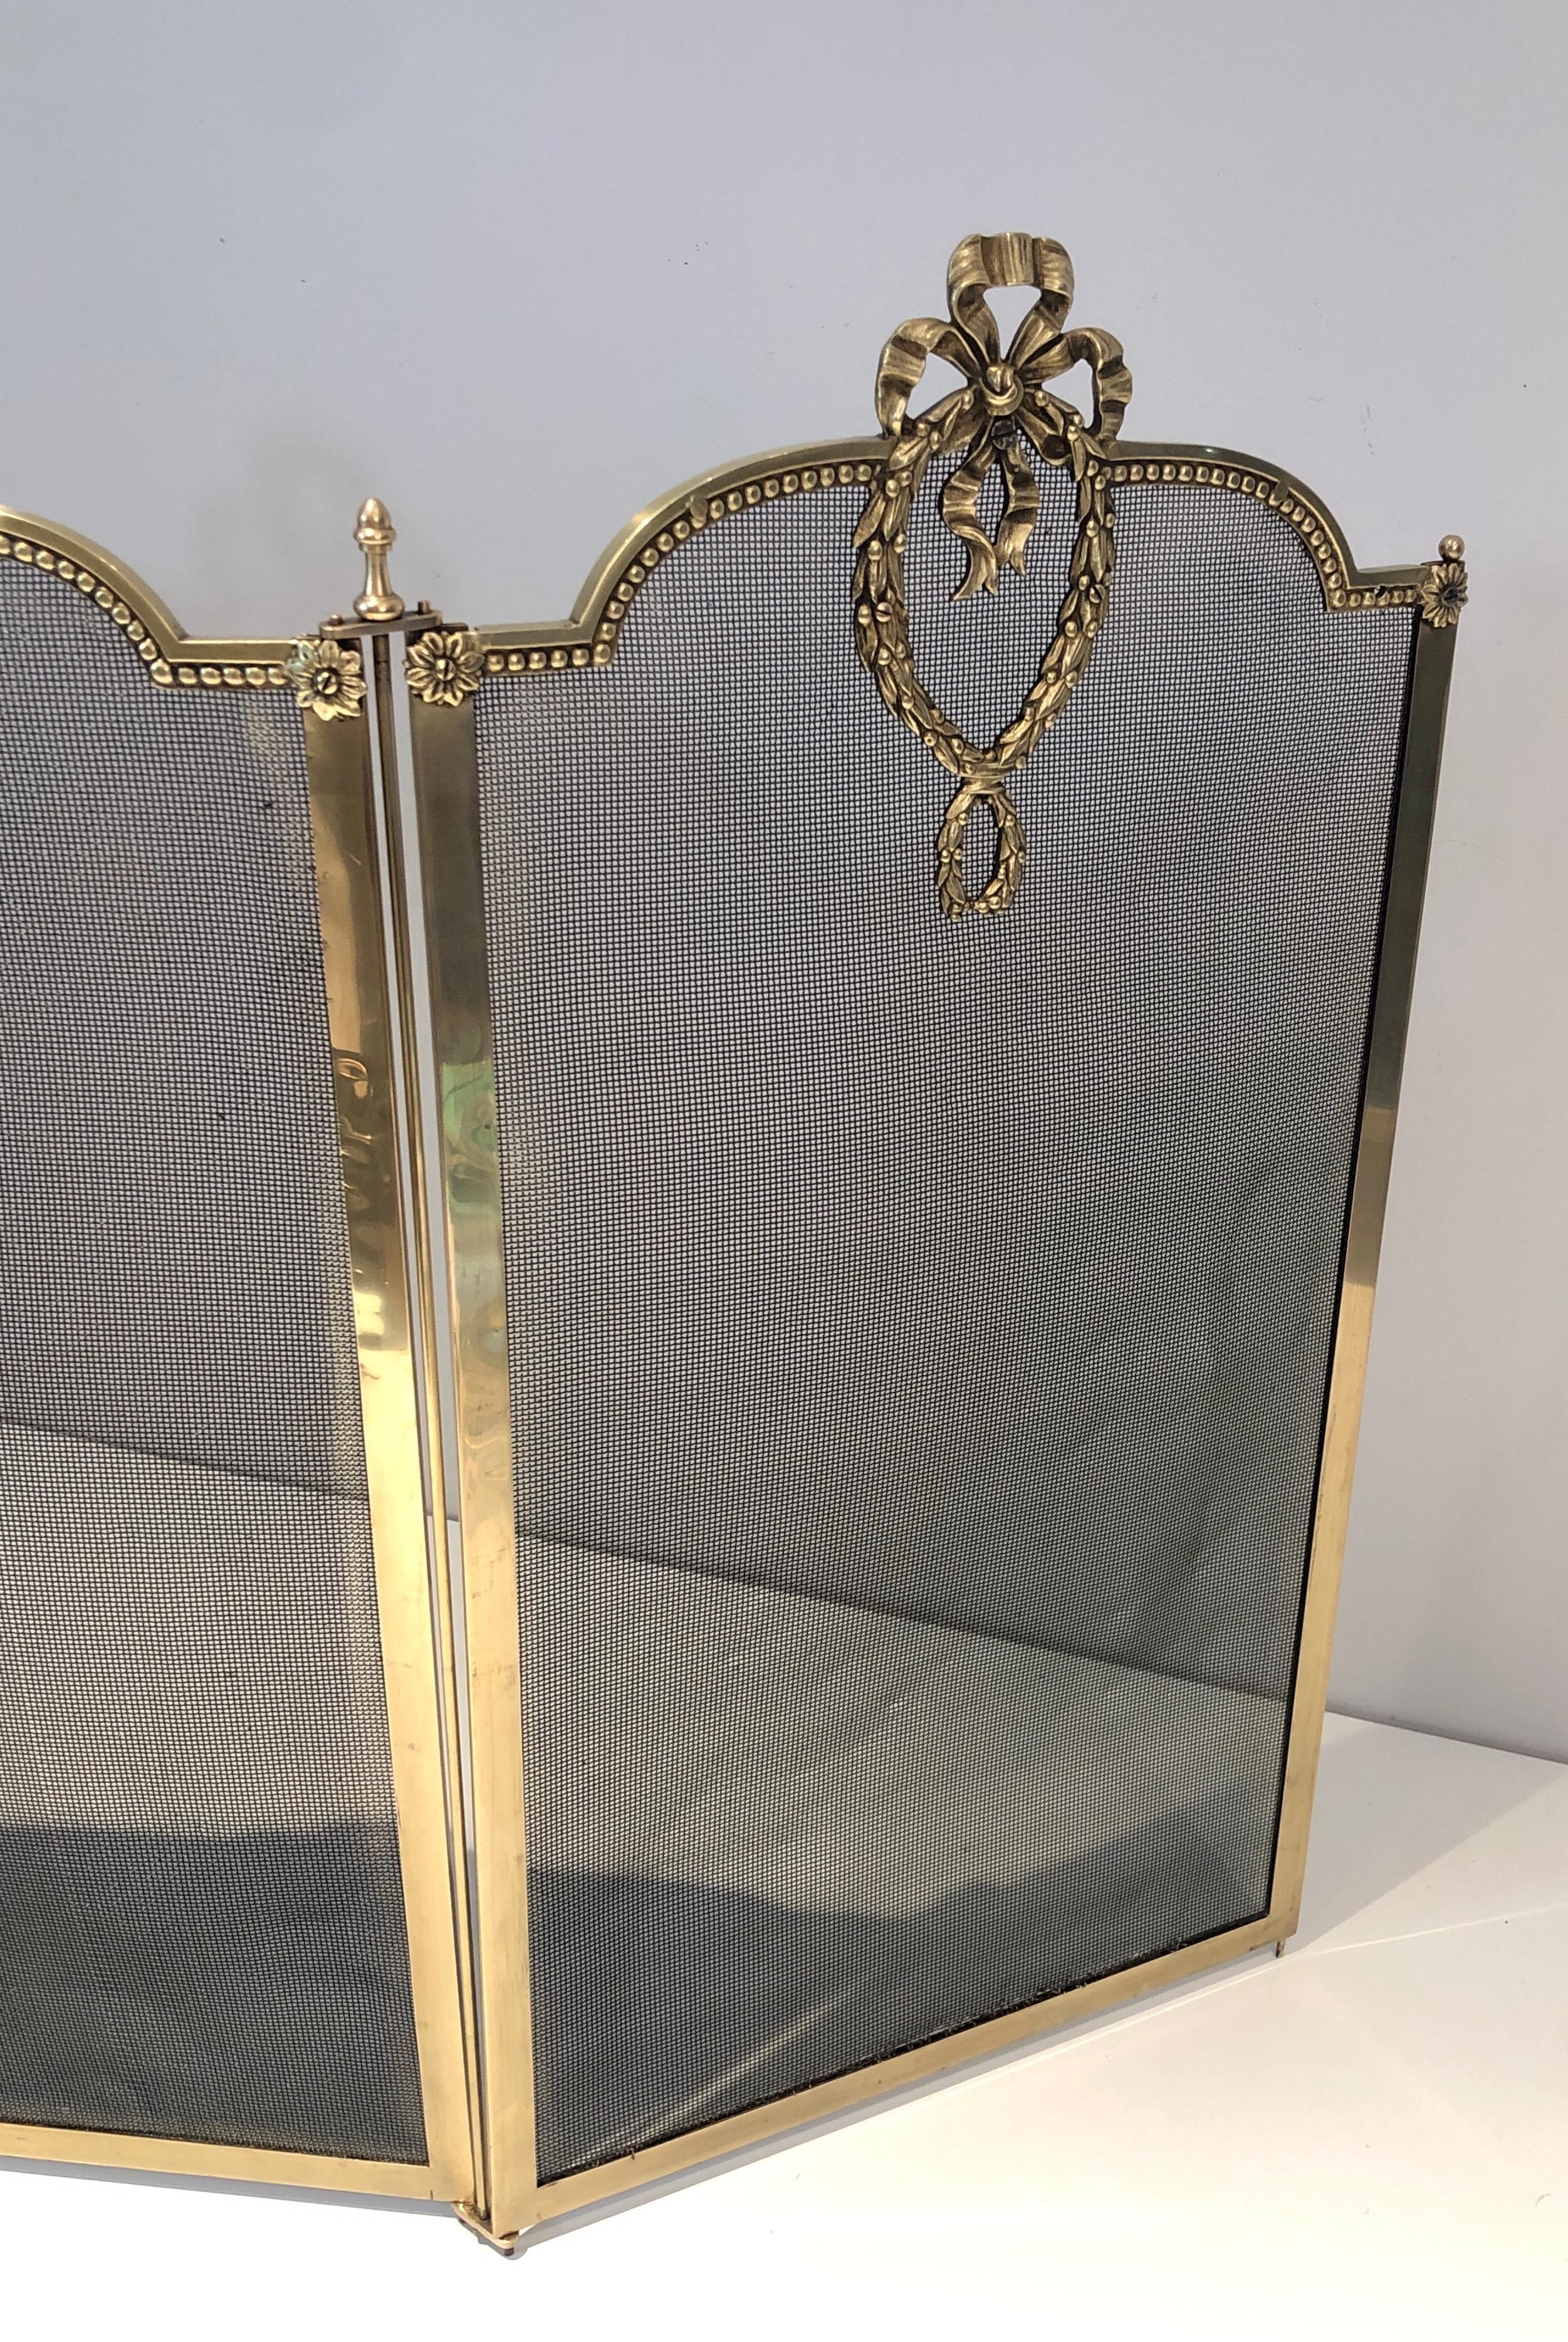 Early 20th Century Louis the 16th Style Brass and Grilling Fireplace Screen, French Work For Sale